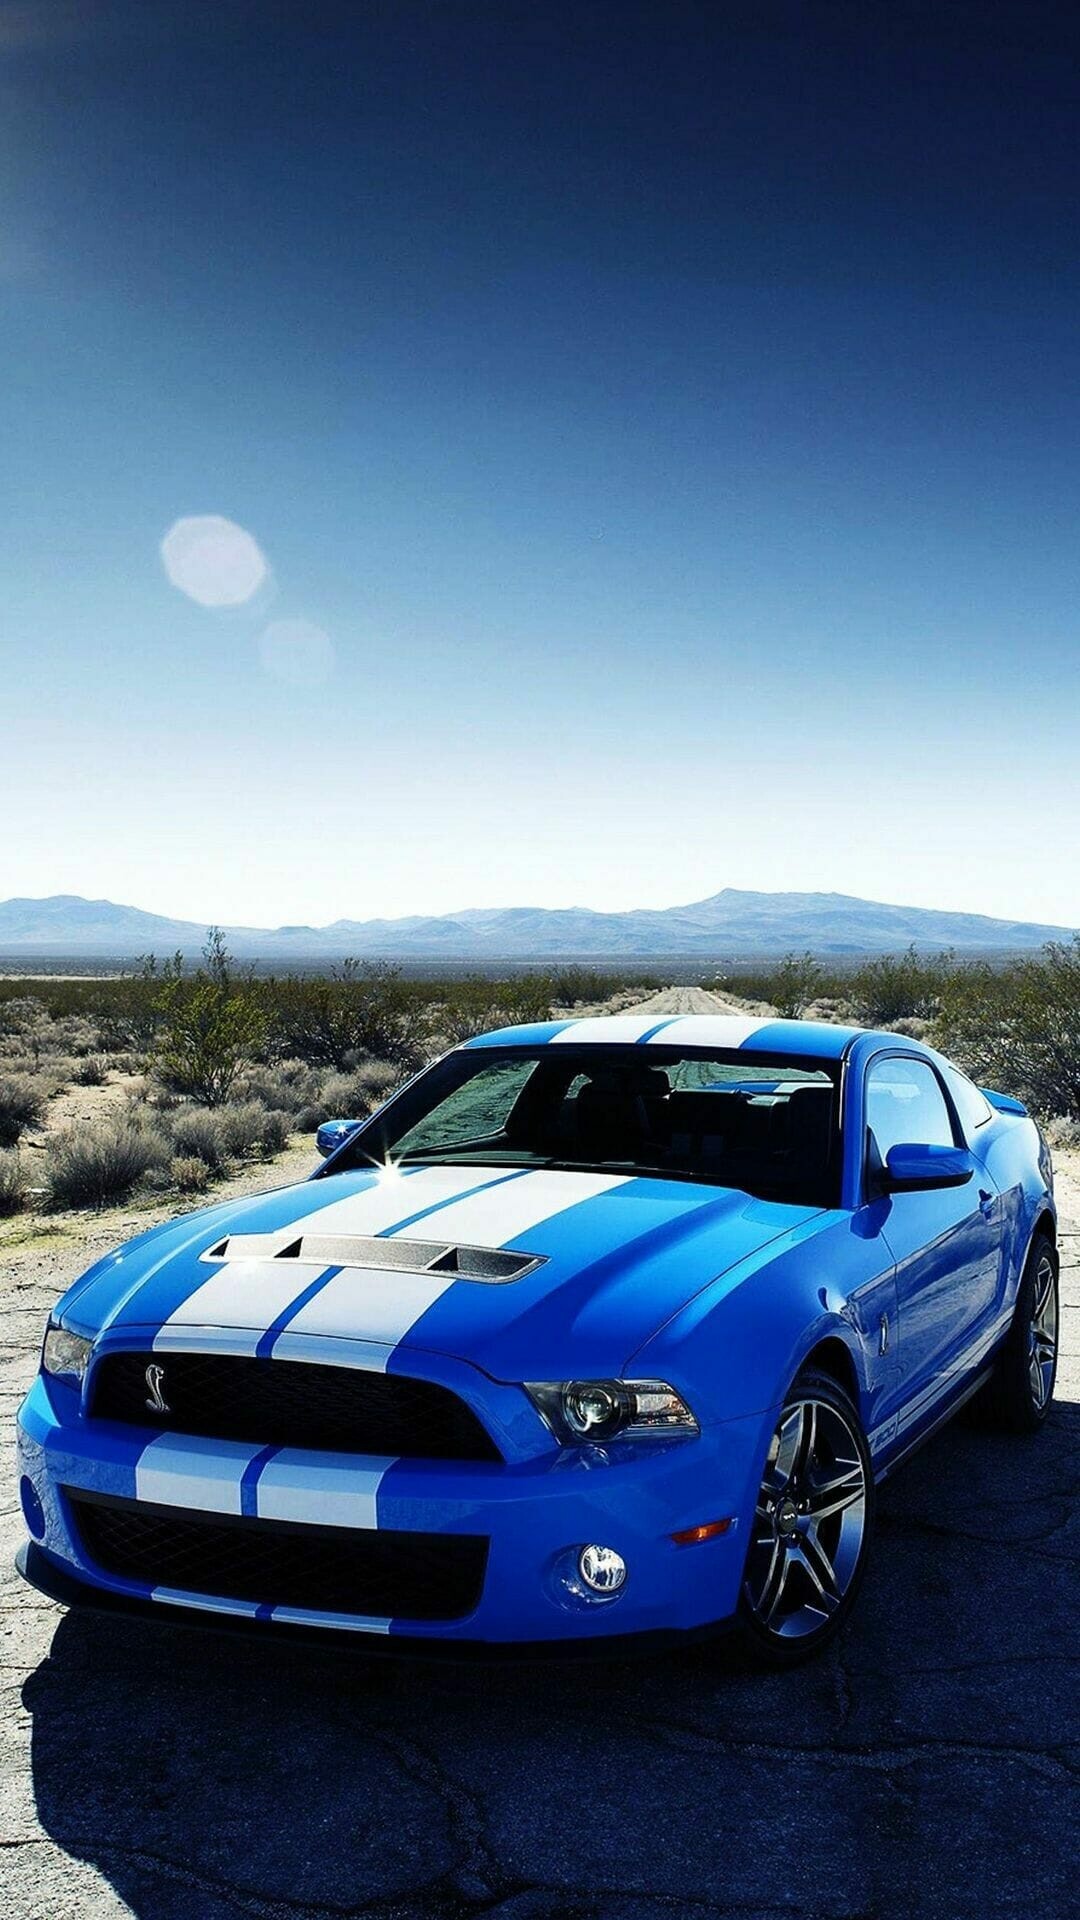 Ford: The eleventh-ranked overall American-based company in the 2018 Fortune 500 list. 1080x1920 Full HD Wallpaper.